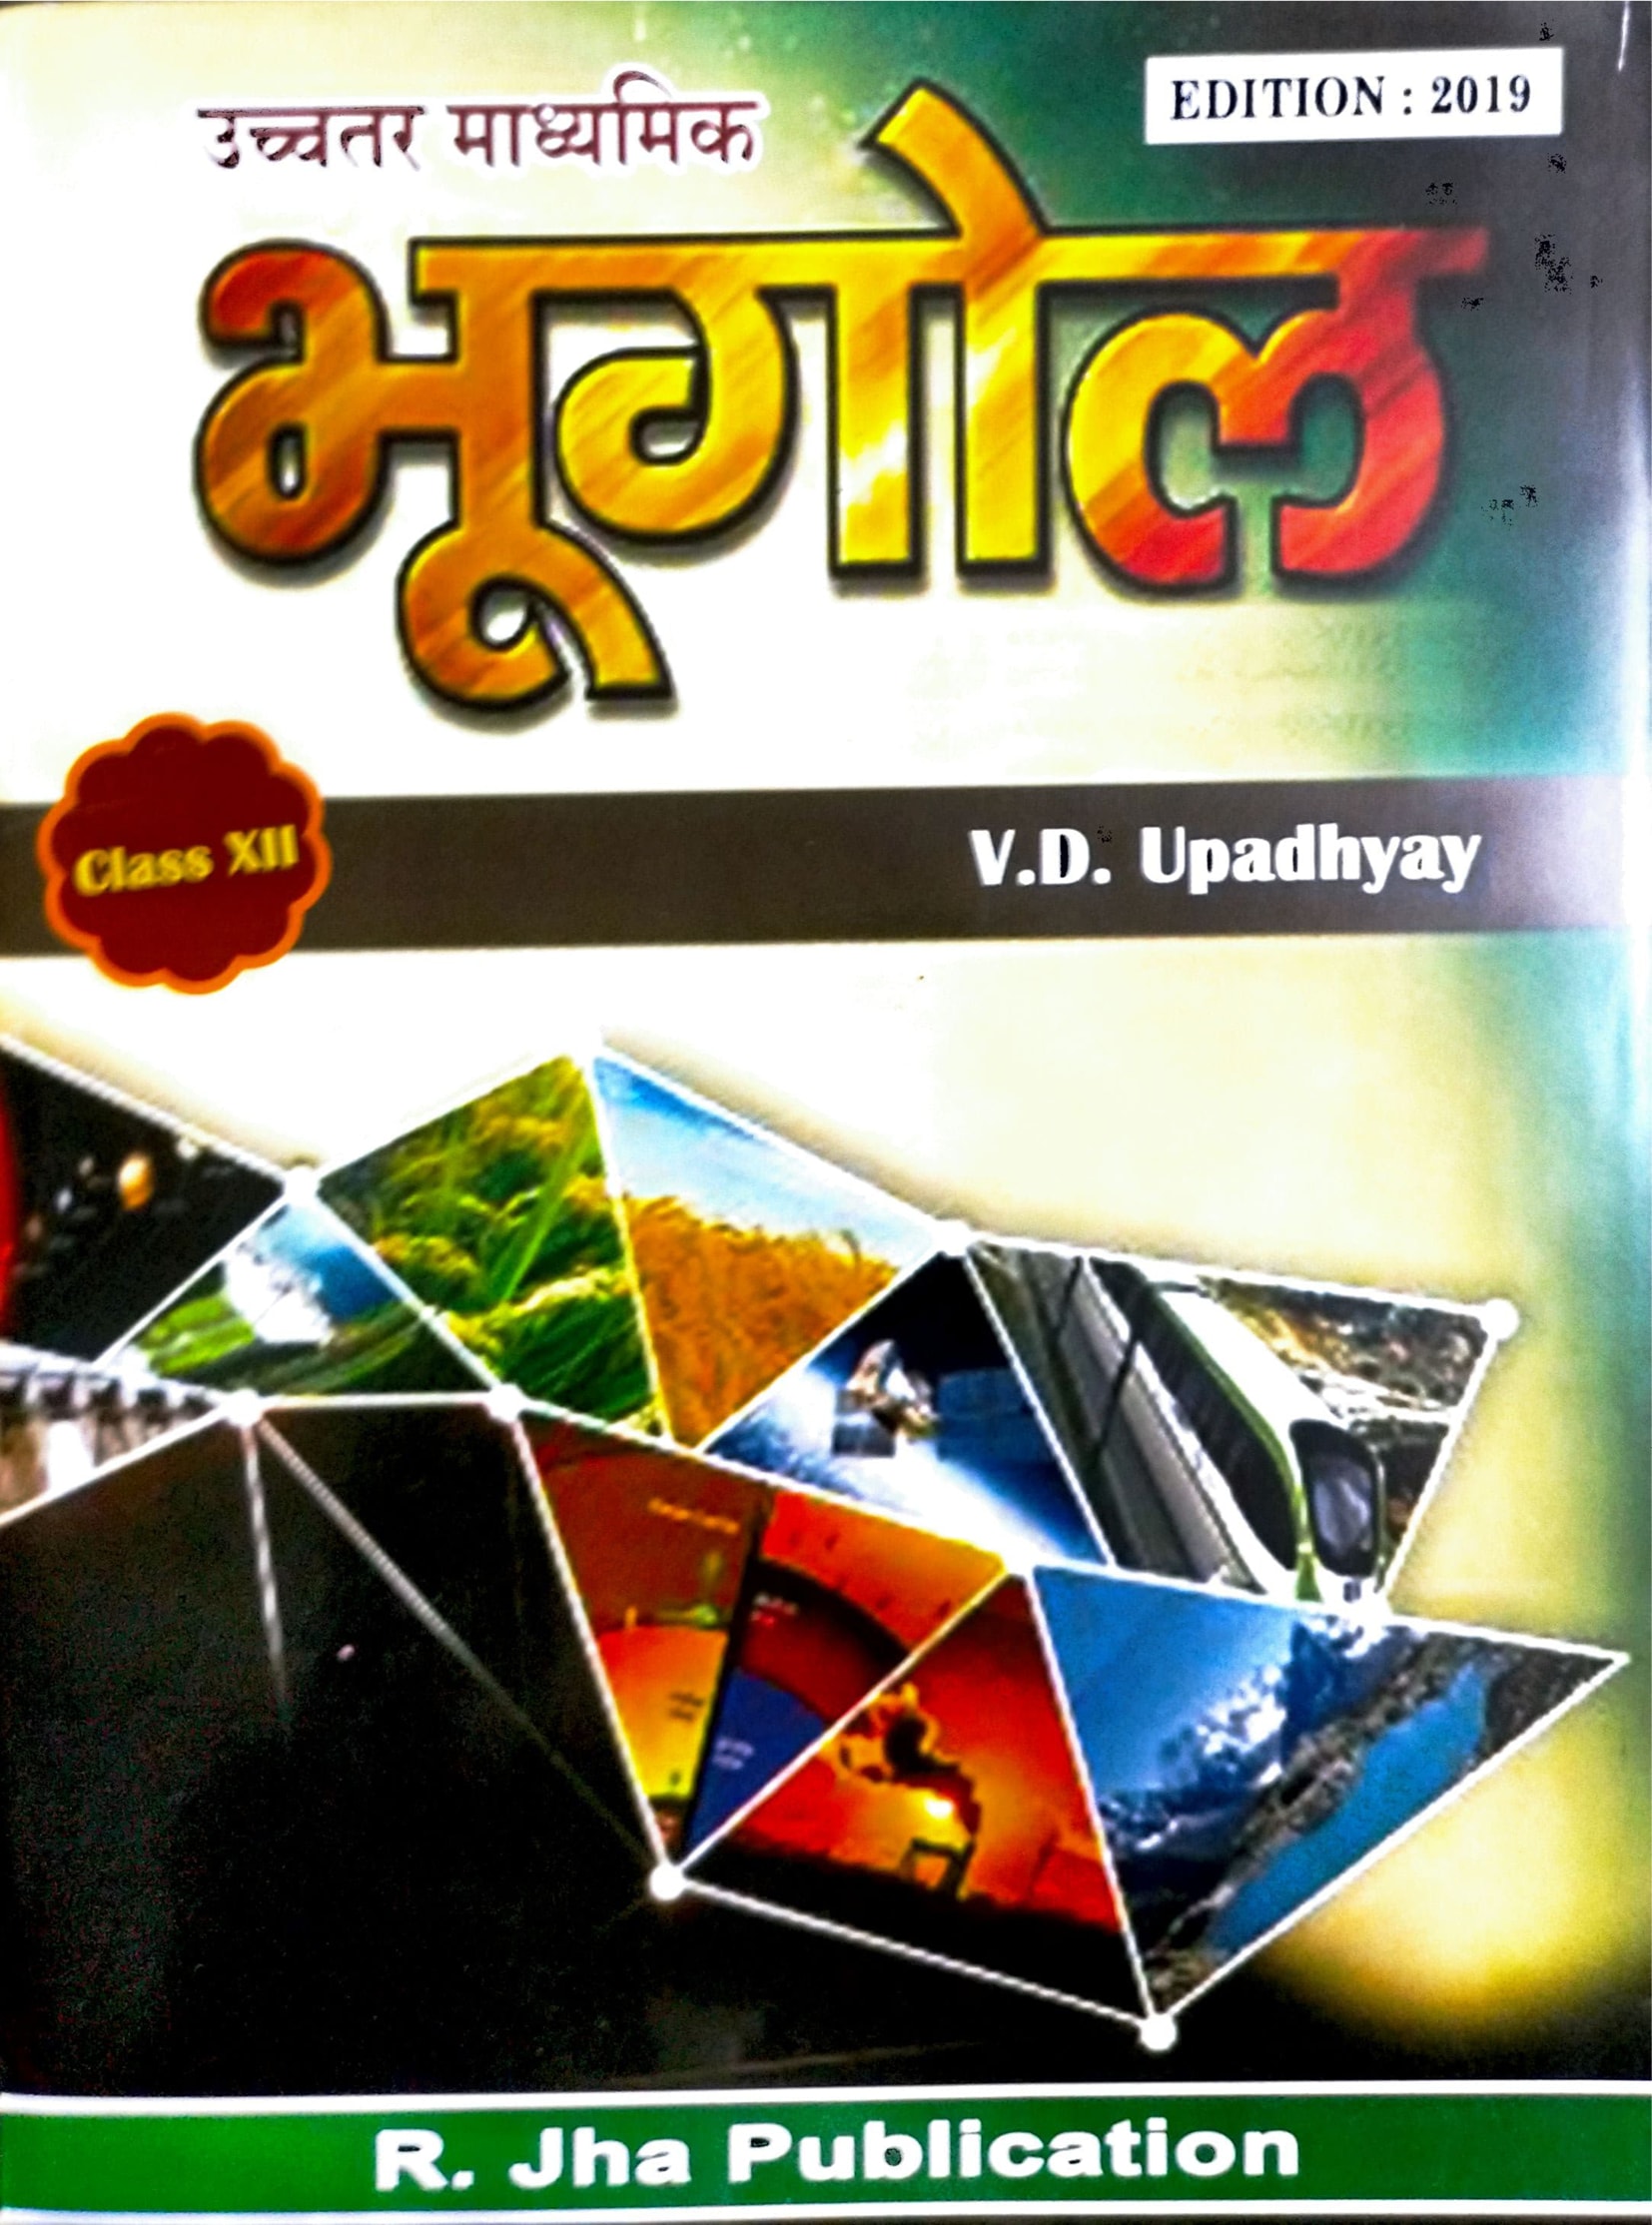 Geography book V.D .upadhyay (R.jha publication)